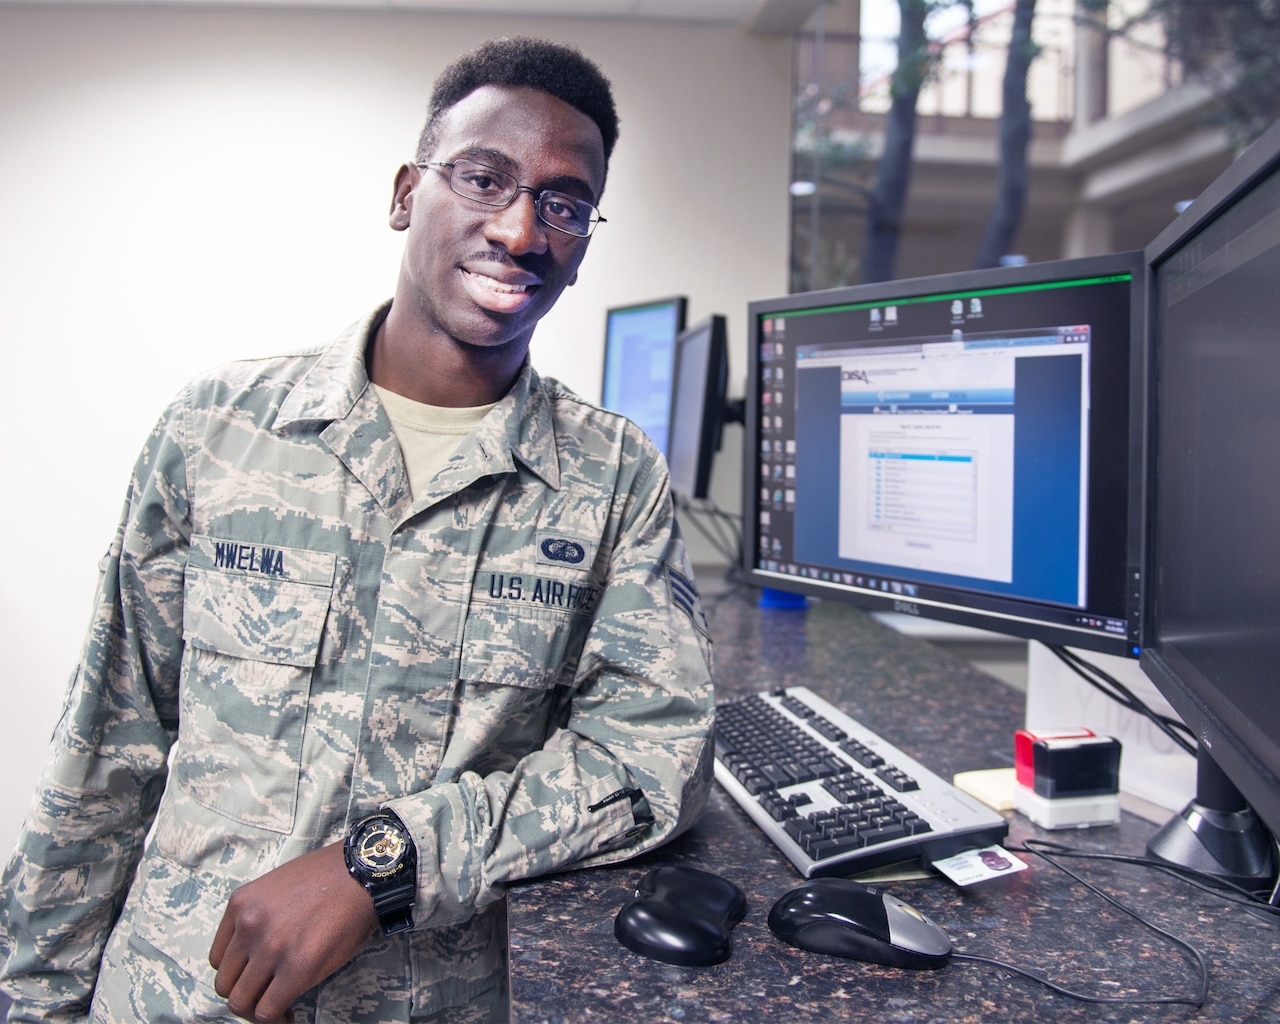 U.S. Air Force Senior Airman Michael Mwelwa, 60th Comptroller Squadron, poses for a photo by his workstation at Travis Air Force Base, Calif., Oct. 25, 2016. Mwelwa was recently awarded U.S. citizenship after coming to the United States at the age five from The Republic of Zambia. (U.S. Air Force photo/Louis Briscese)